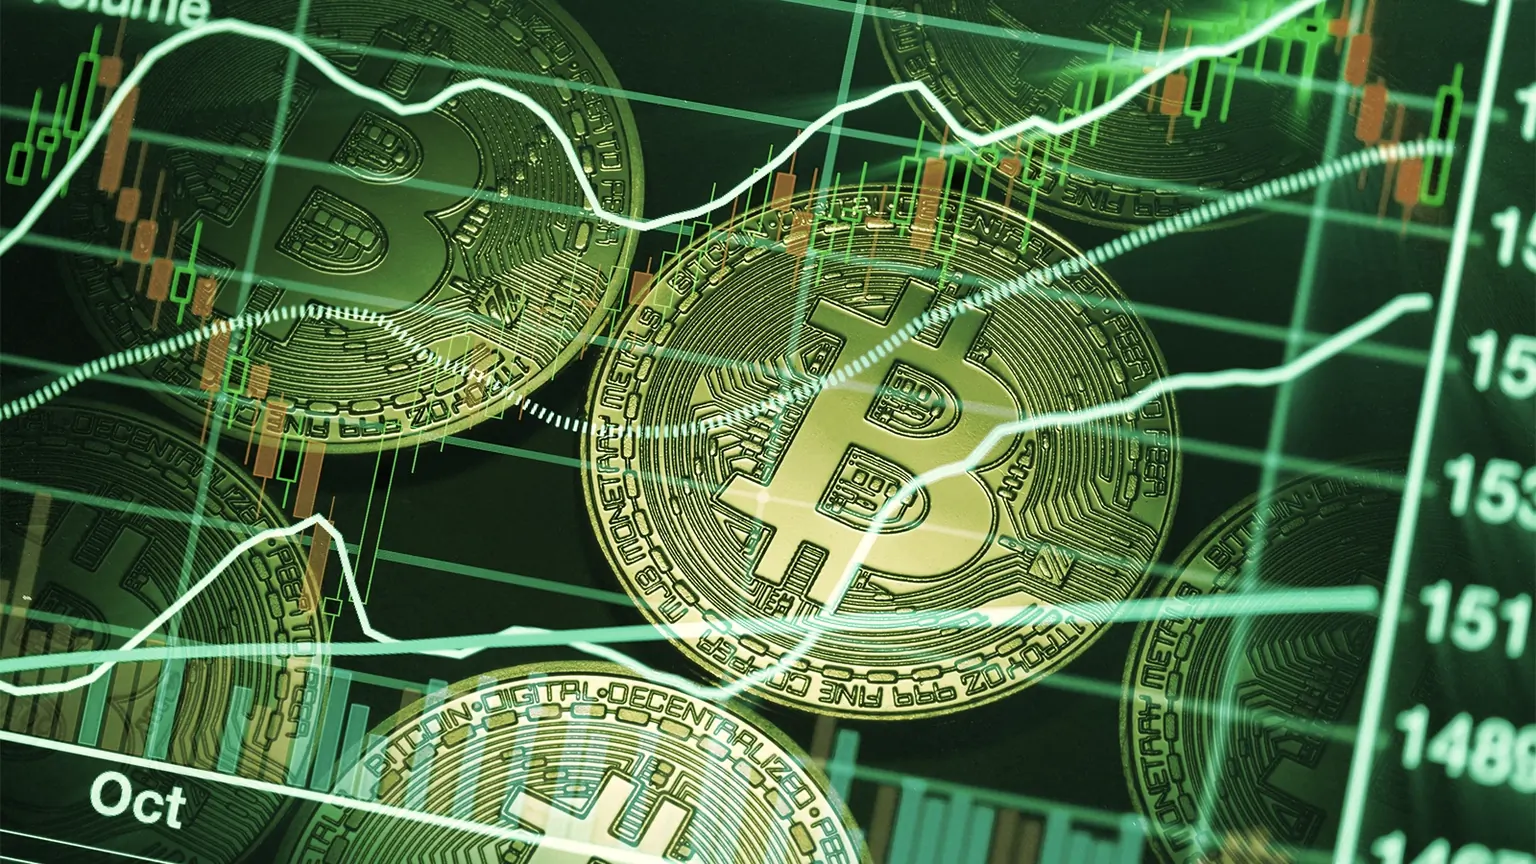 Bitcoin investors are split over where the price goes next. IMAGE: Shutterstock